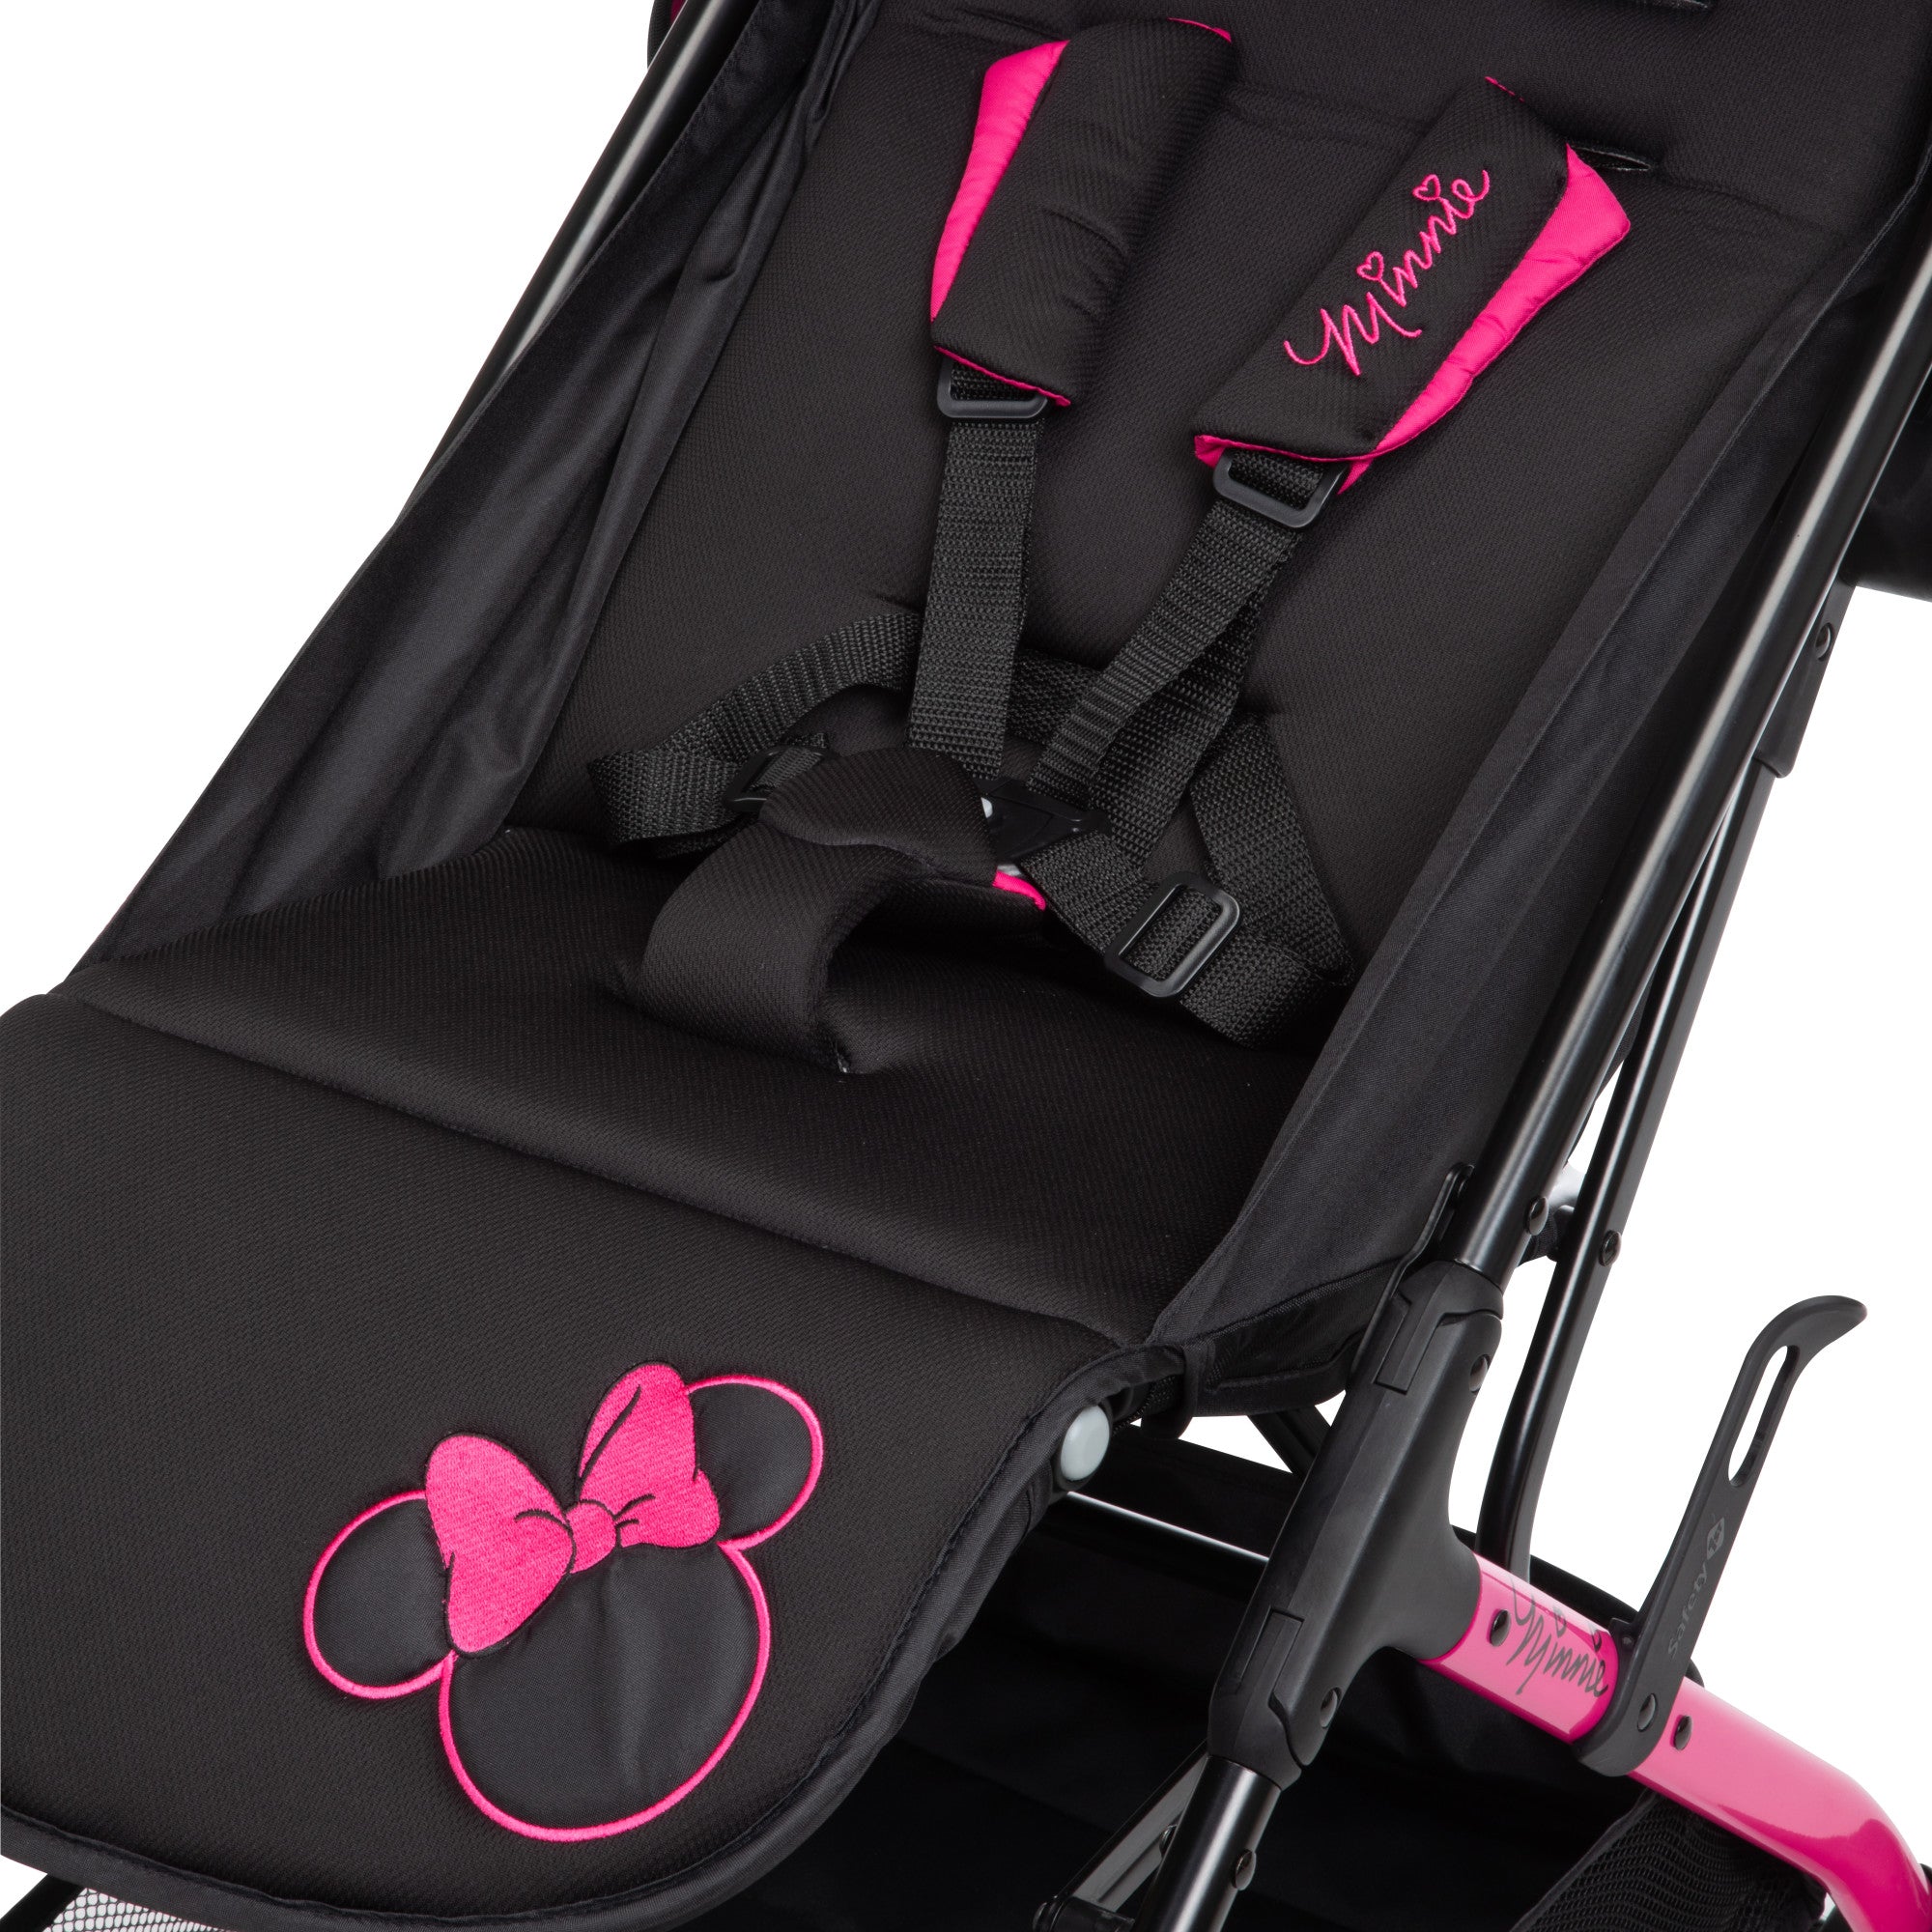 Disney Baby Teeny Ultra Compact Stroller -  Minnie - details